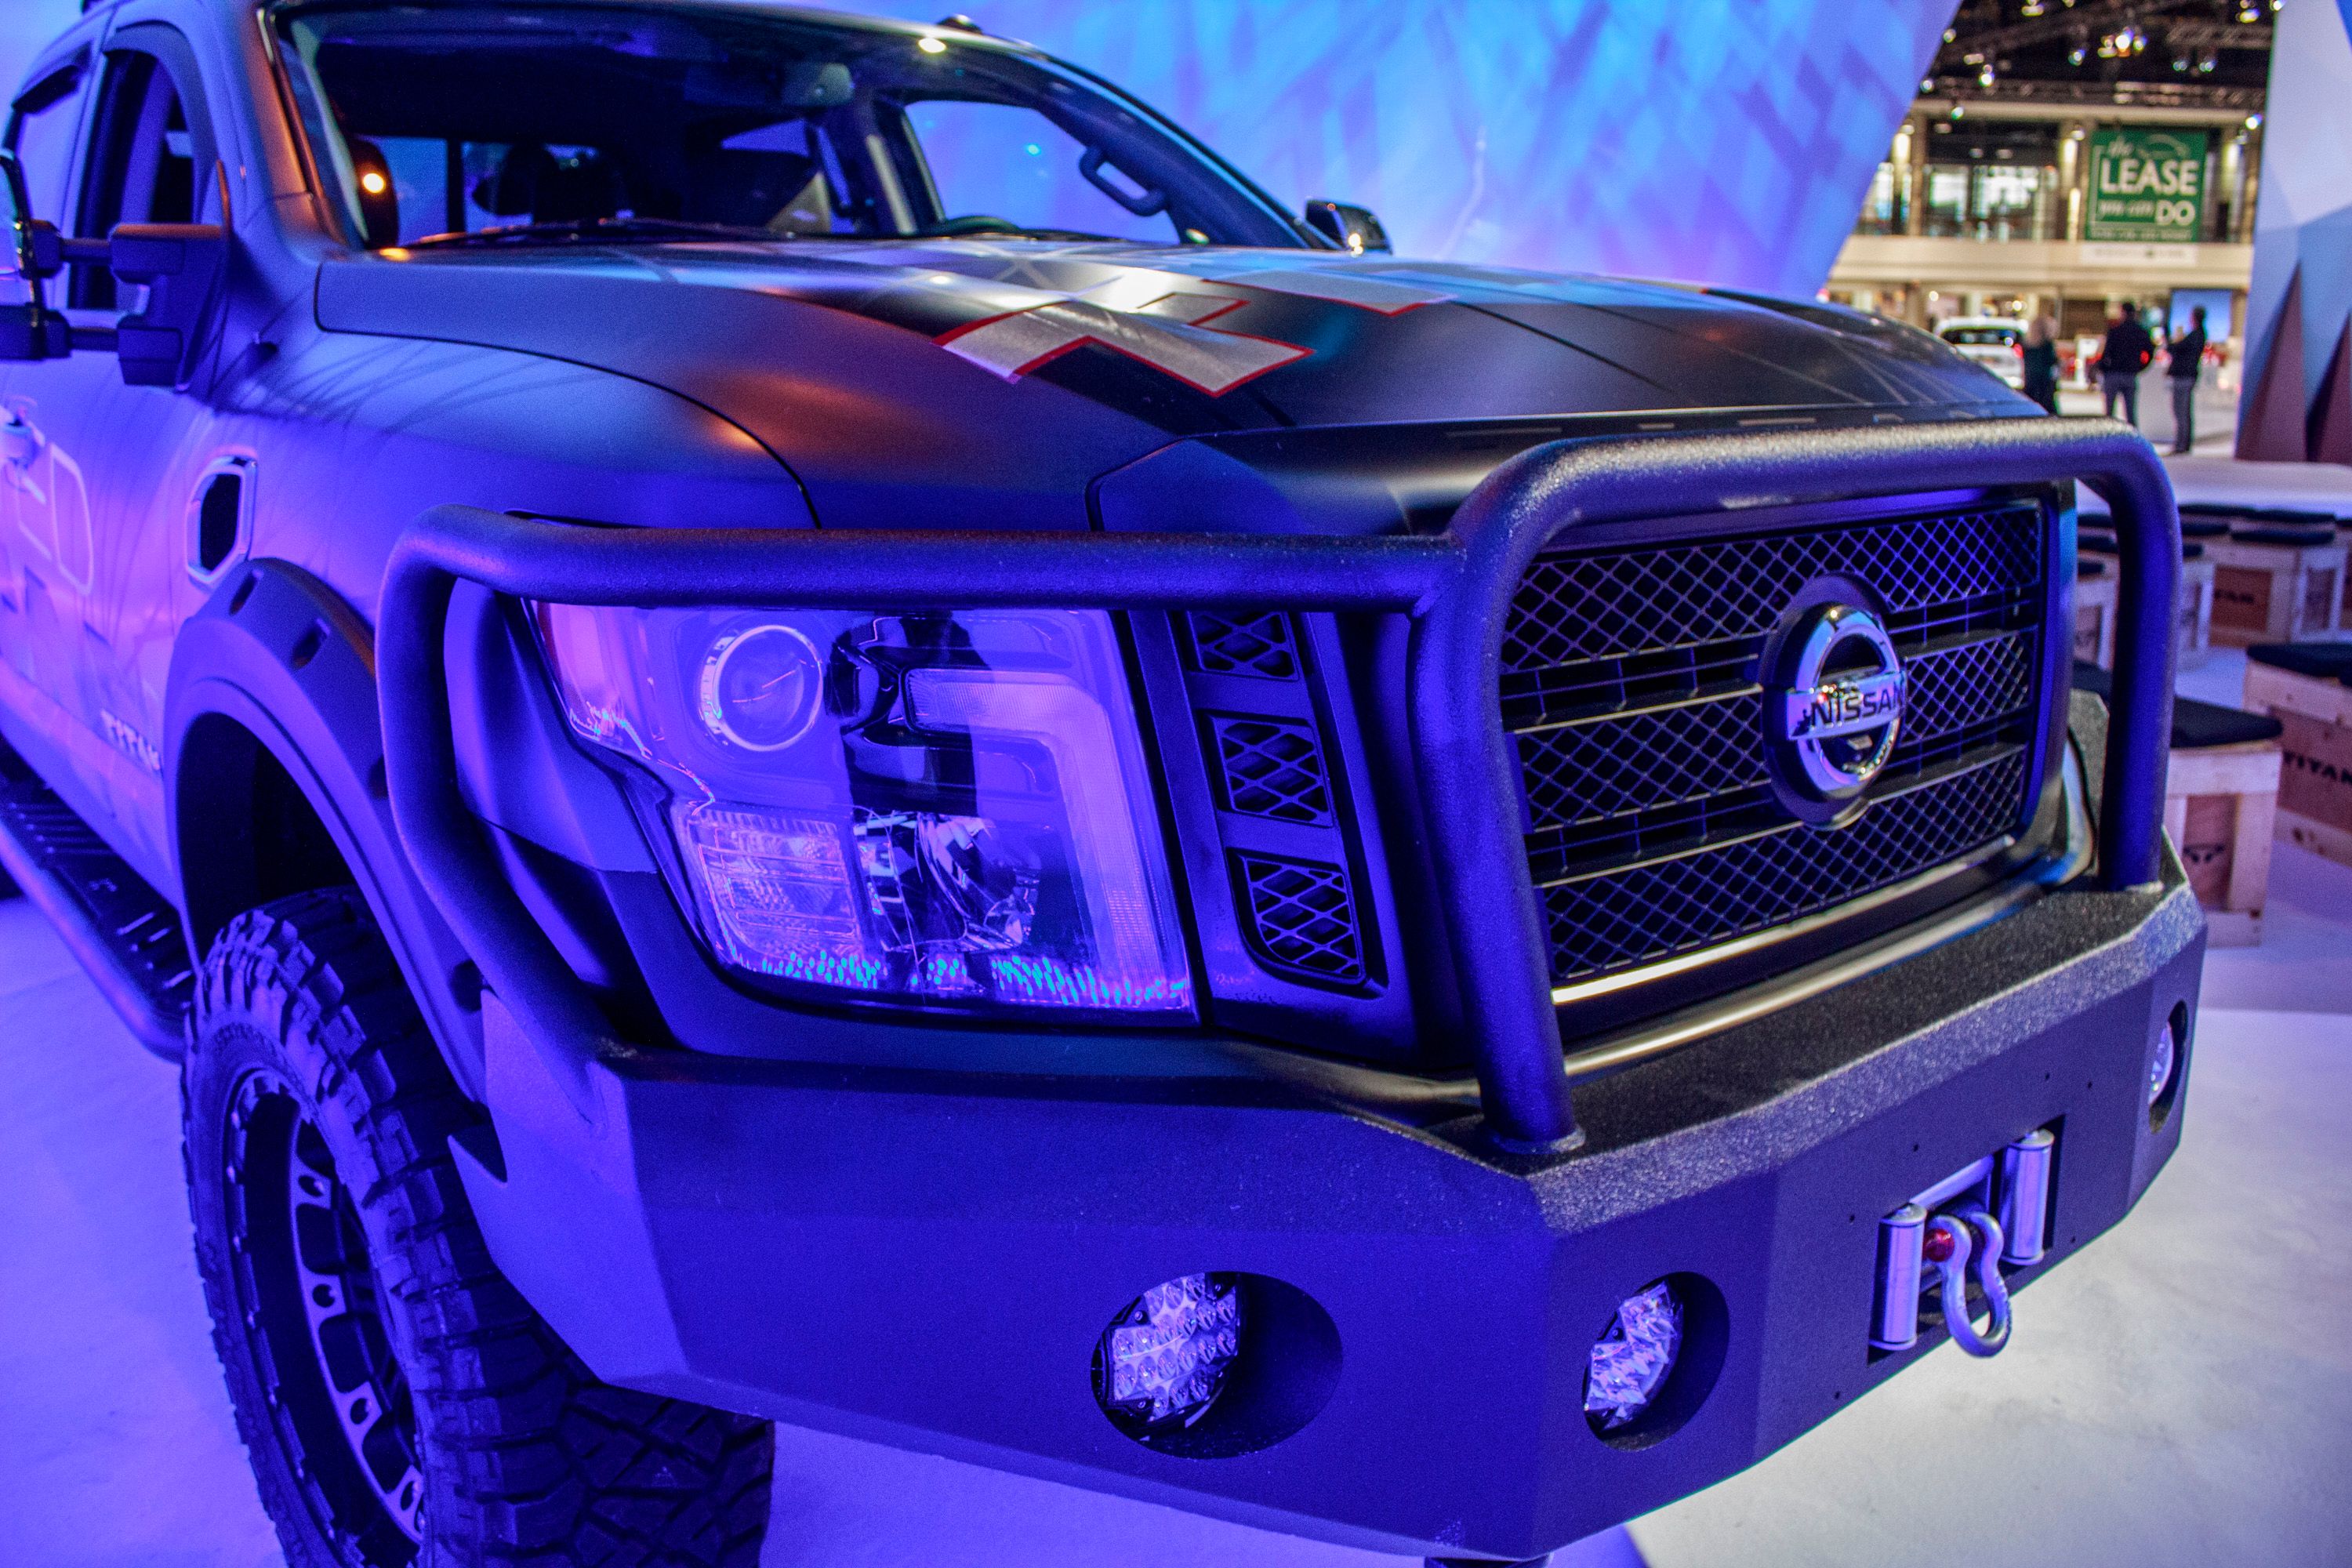 2018 Nissan TITAN and TITAN XD Get a New Lift Kit From Icon Vehicle Dynamics